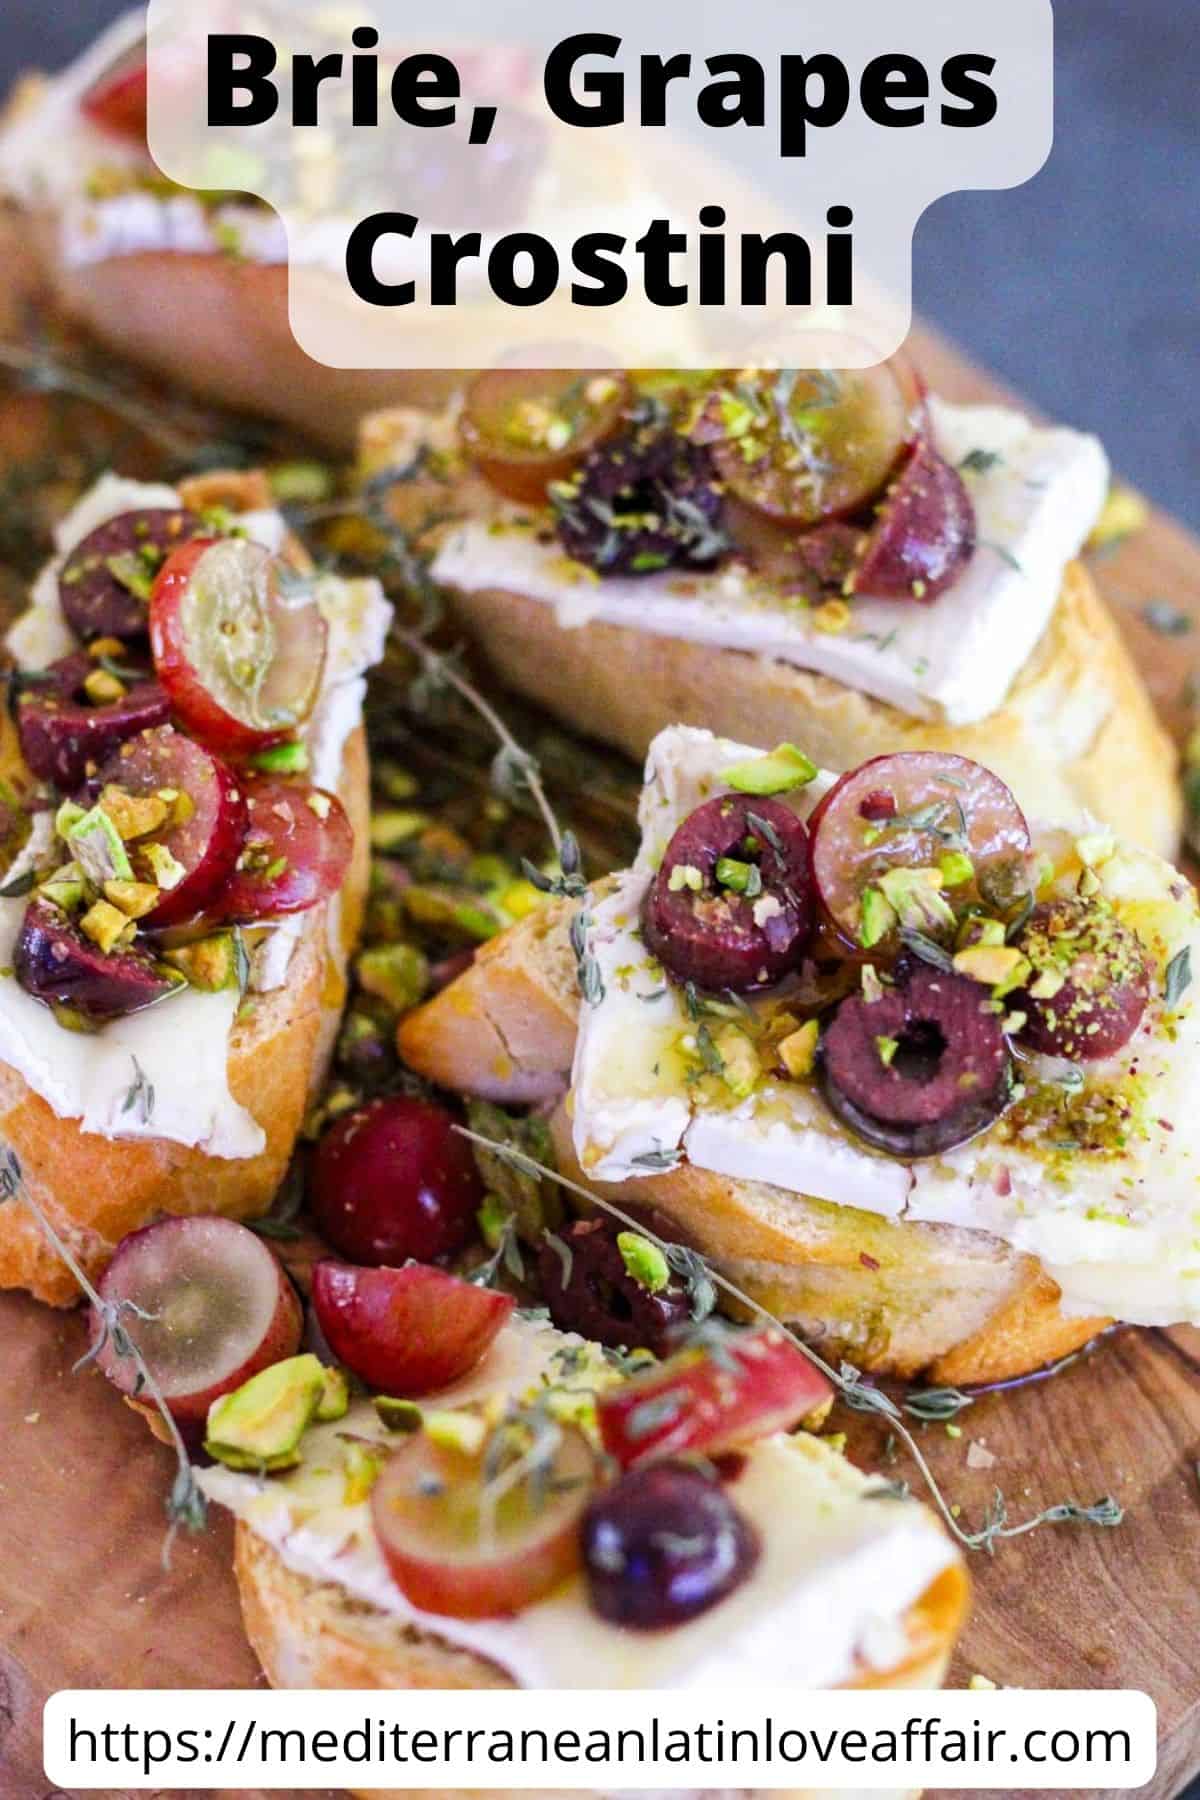 An image prepared for Pinterest. It shows brie, grapes crostini with olive and pistachios on a cheese board. The image has a title bar on top and a website link at the bottom.